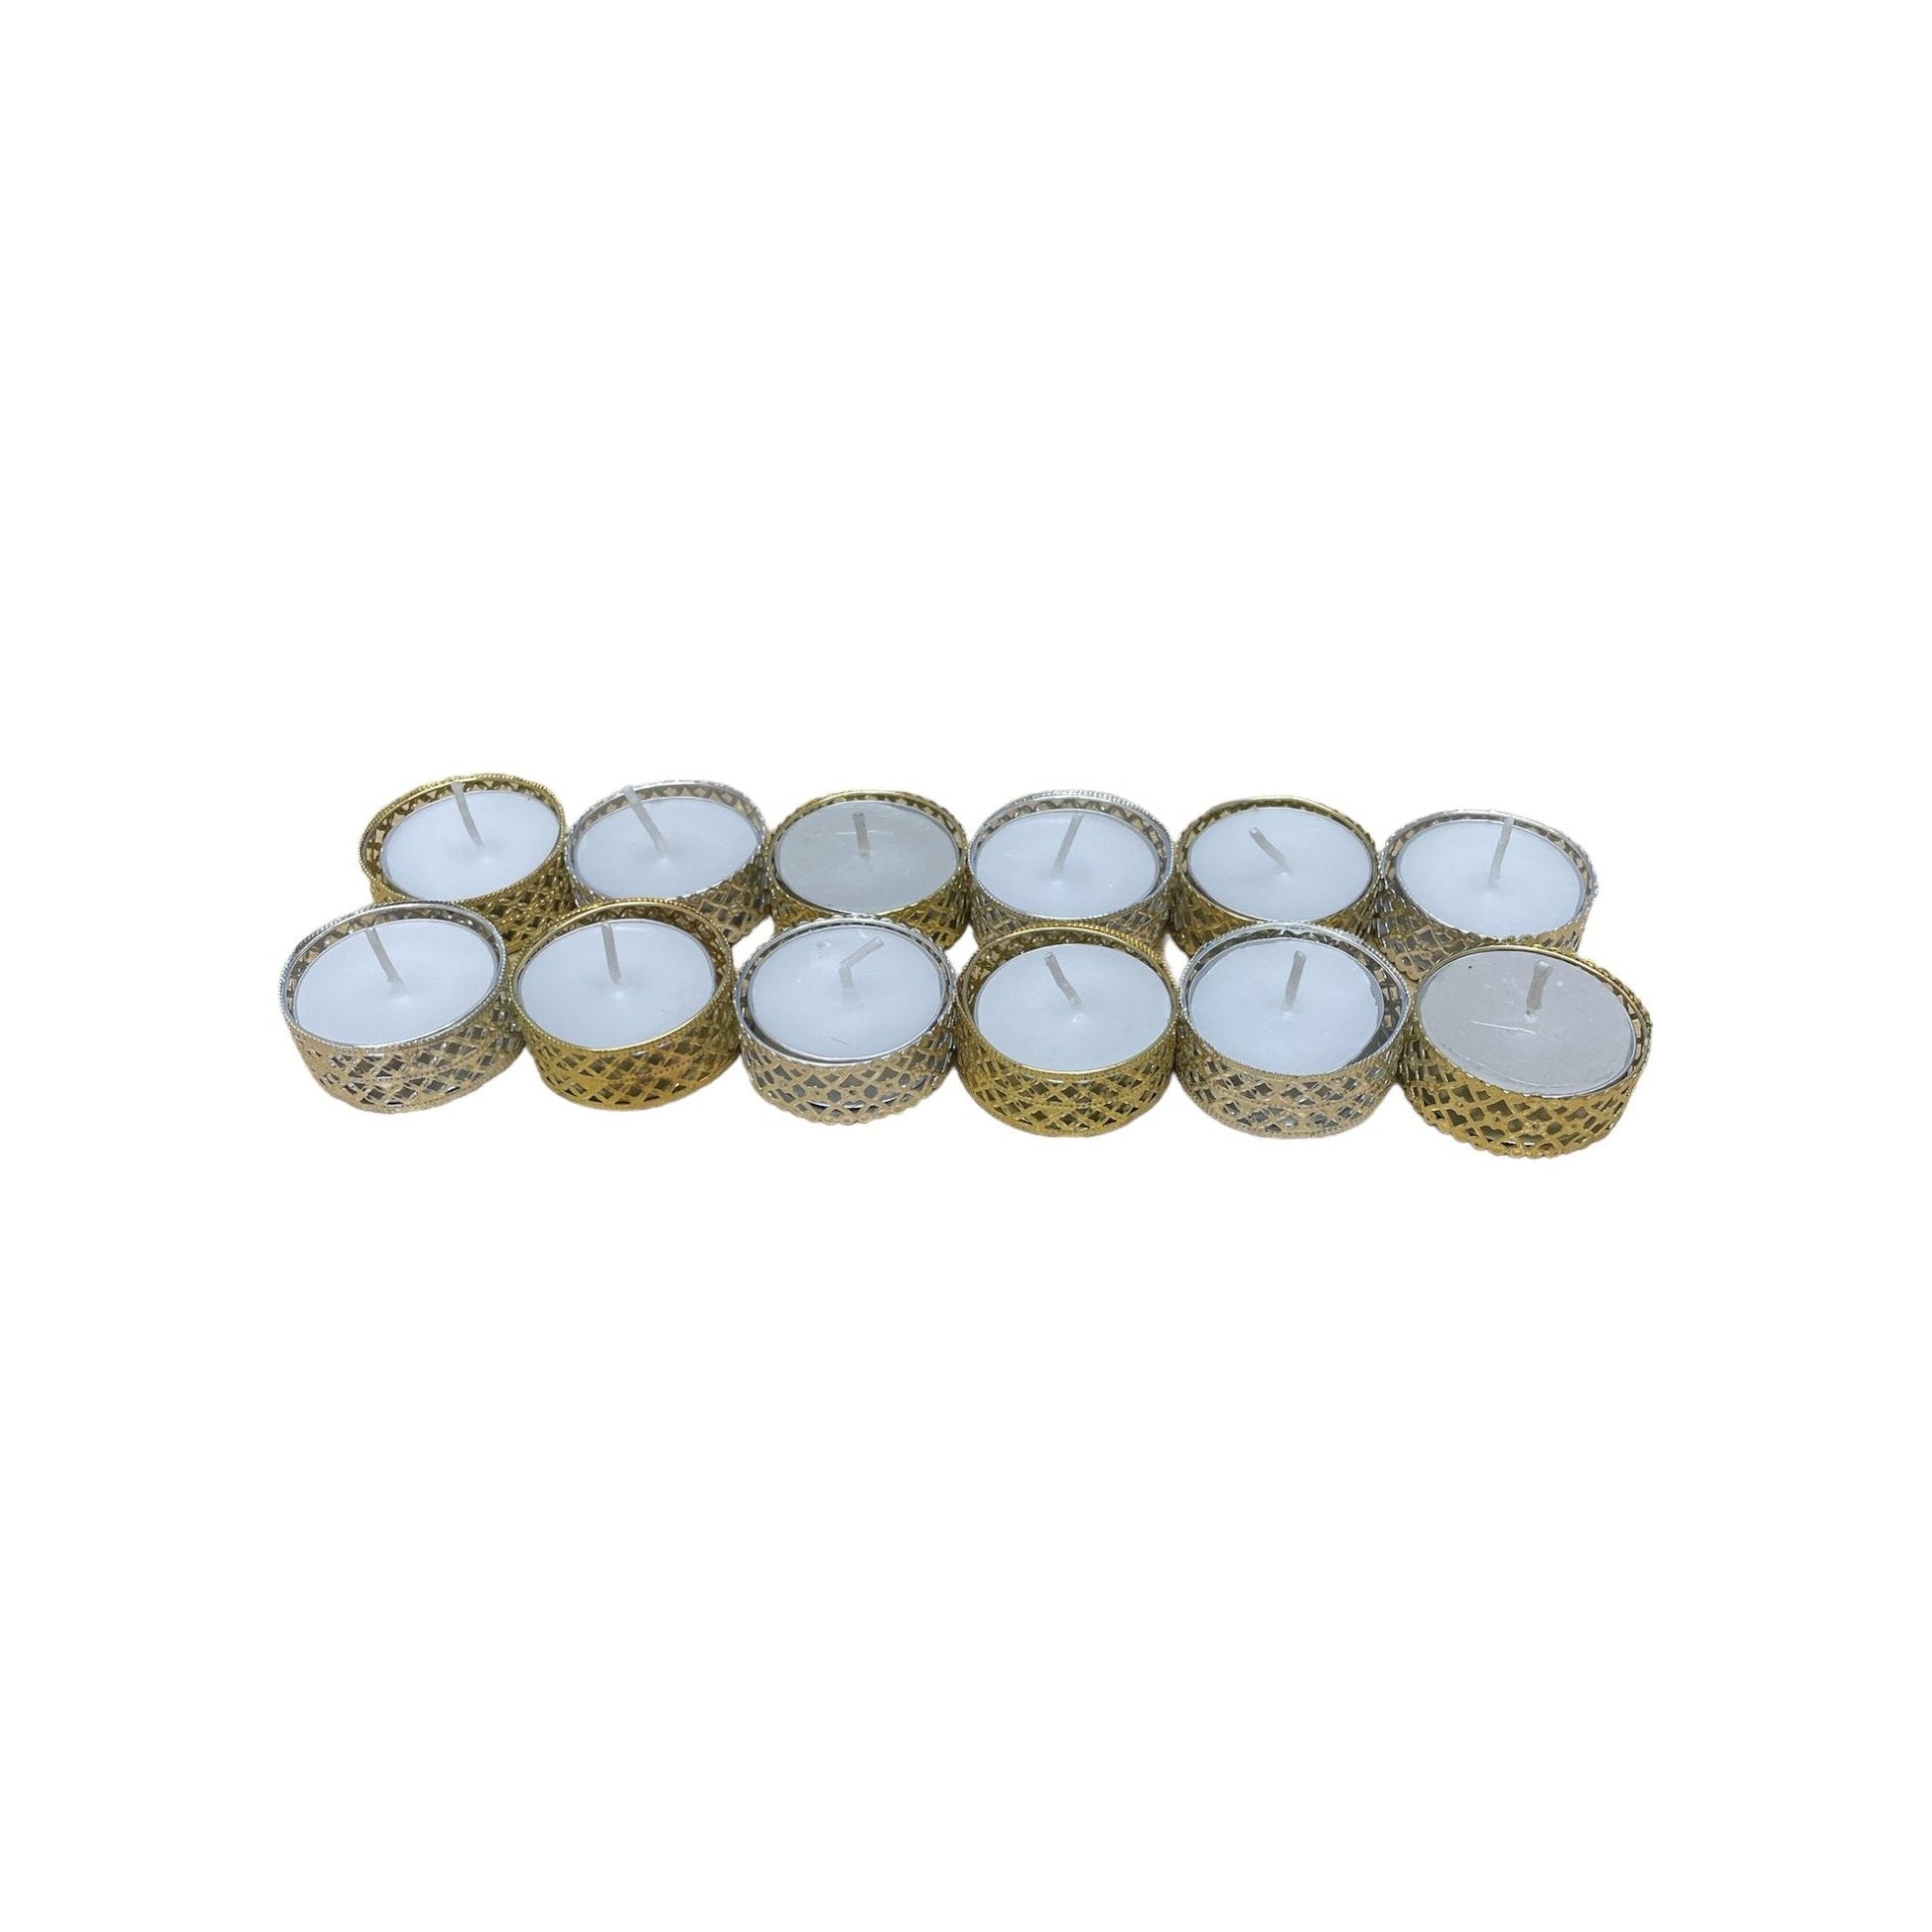 Silver and Gold Heart Pattern Tea Light Candles, Pack of 12 - Ashton and Finch